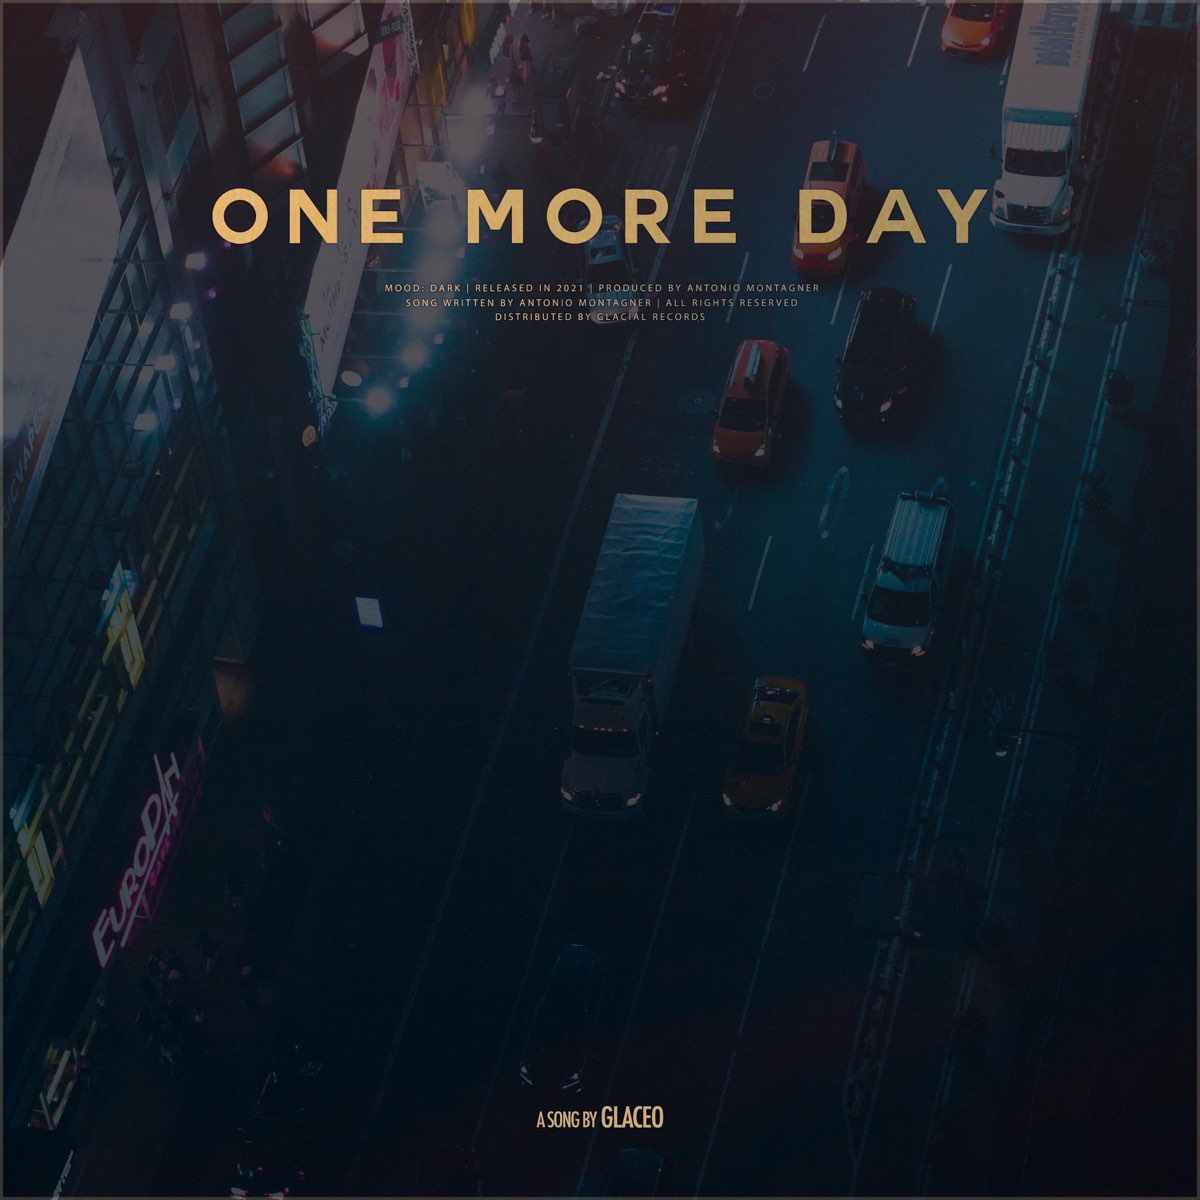 One more day live. One more Day песня. One Day more. Группа one more Day.